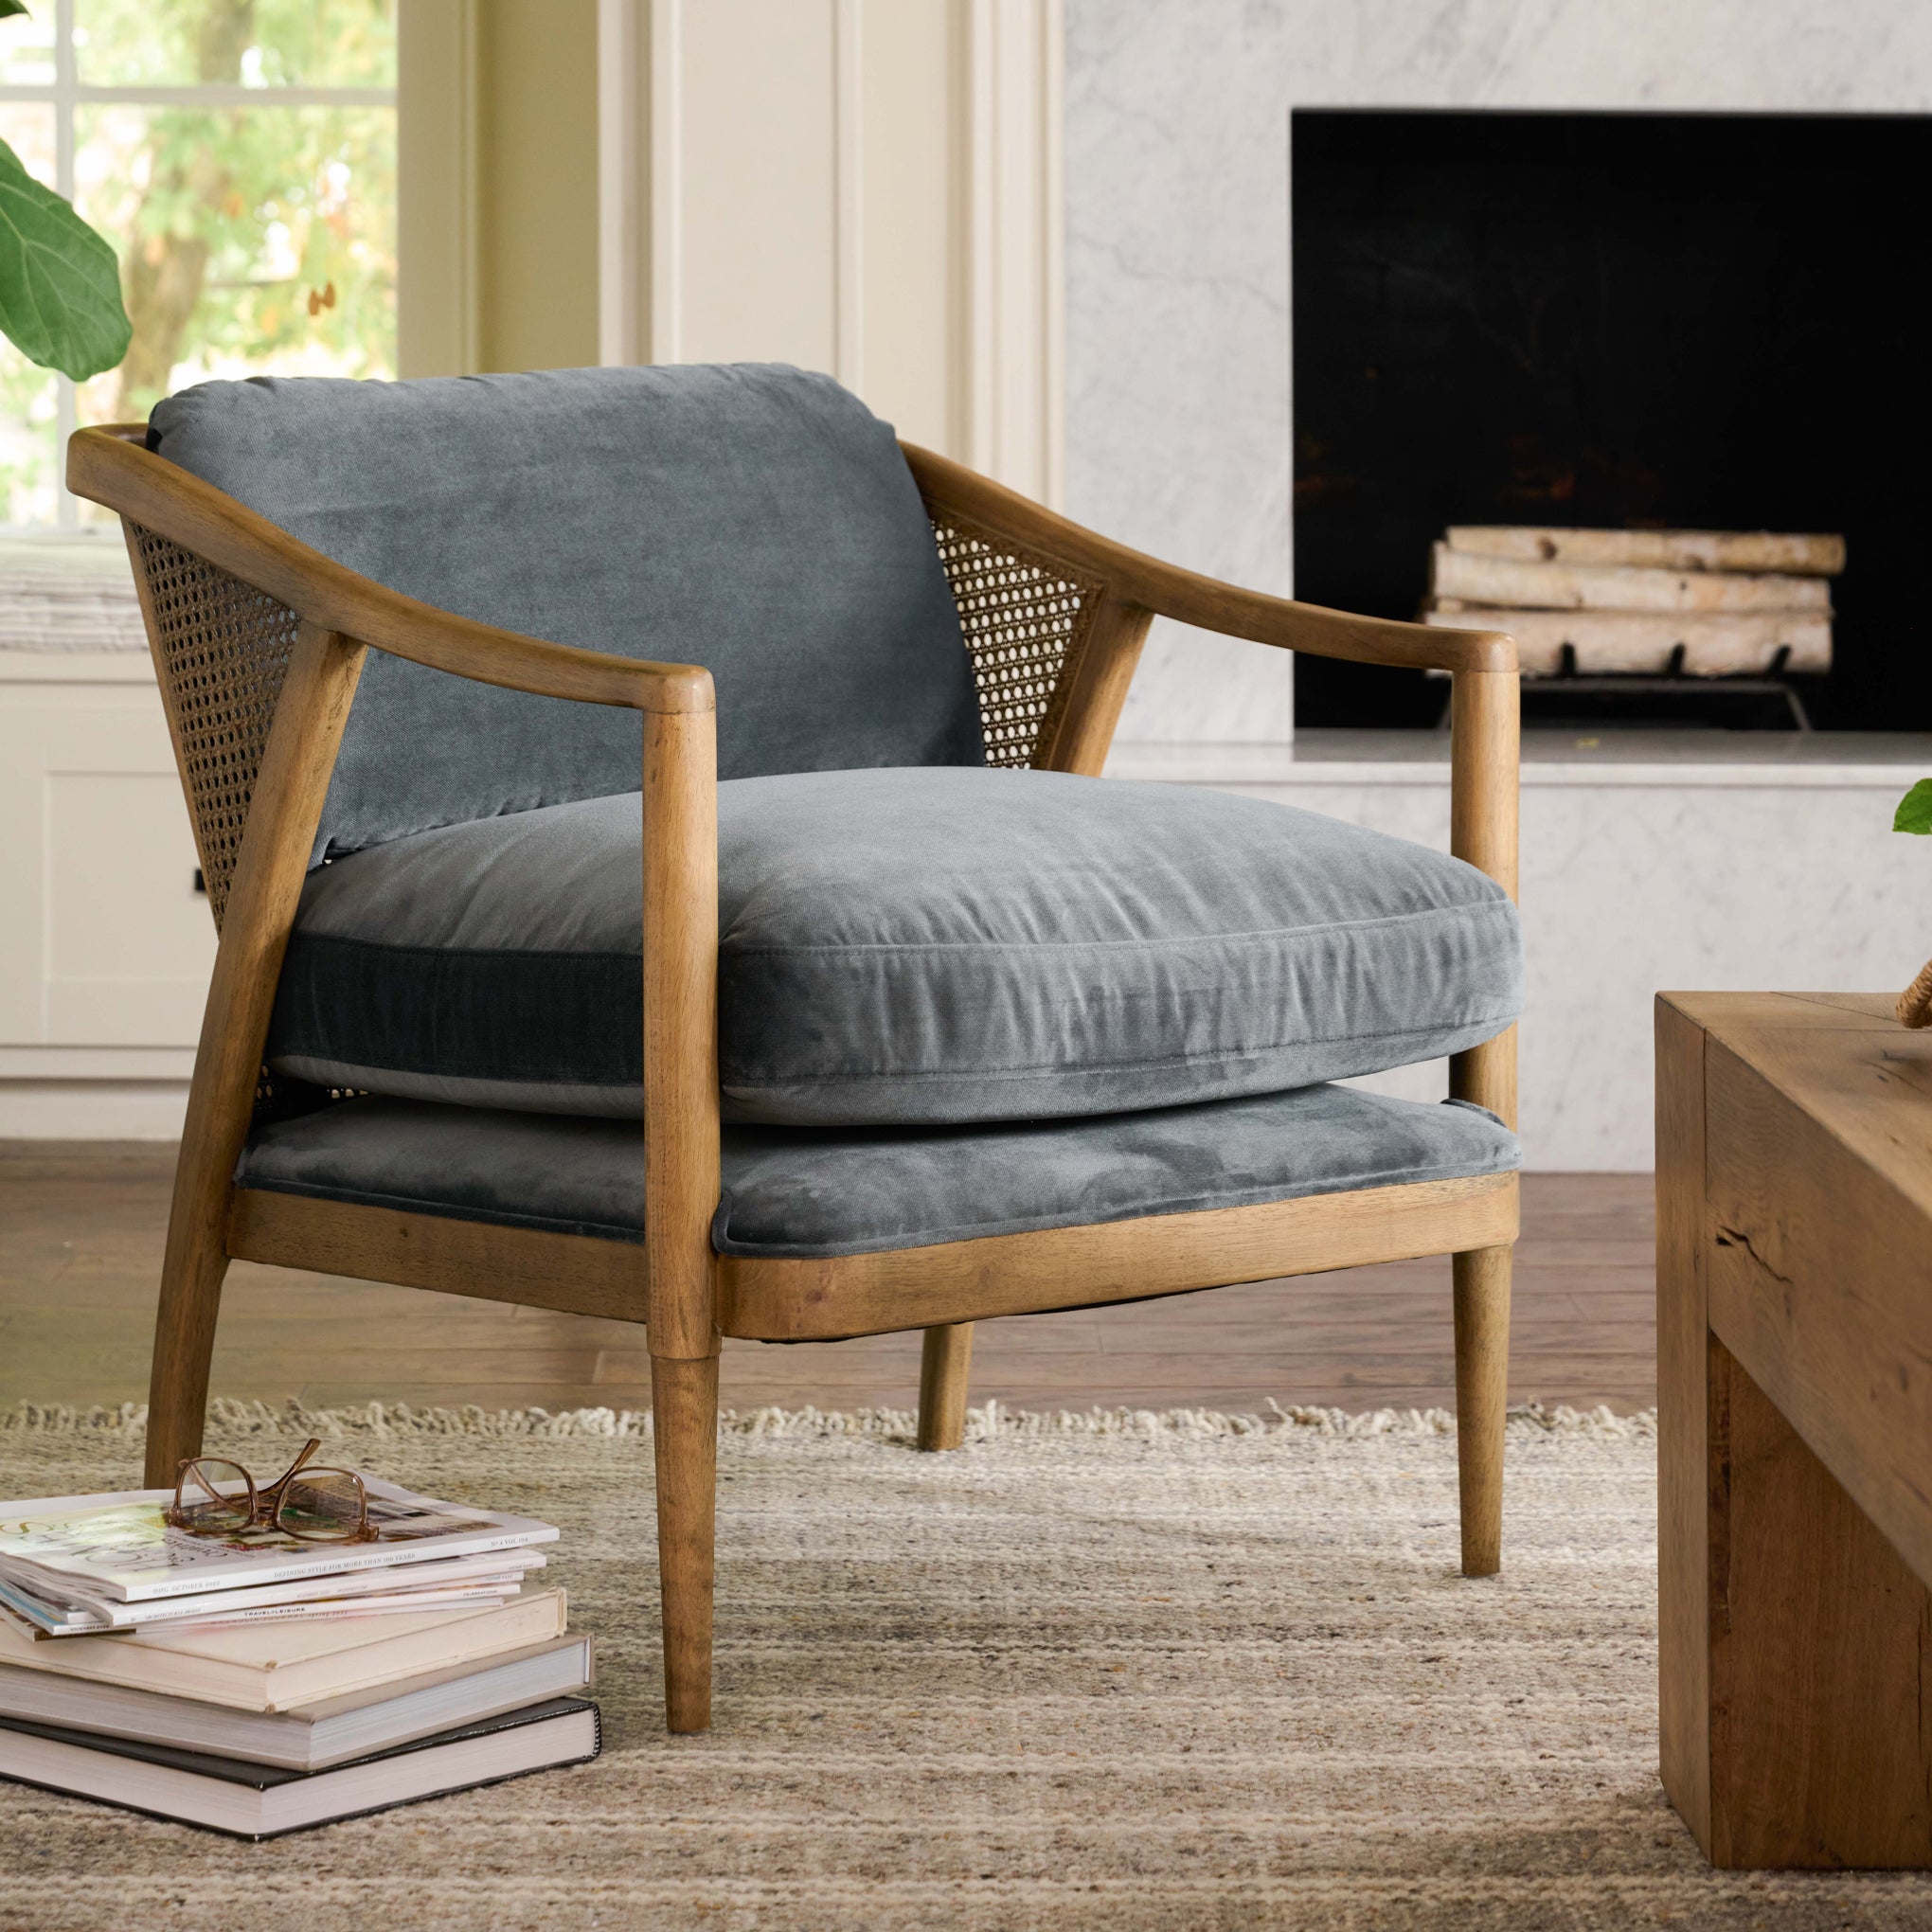 Hollis Accent Chair On sale for $1119.20, discounted from $1399.00